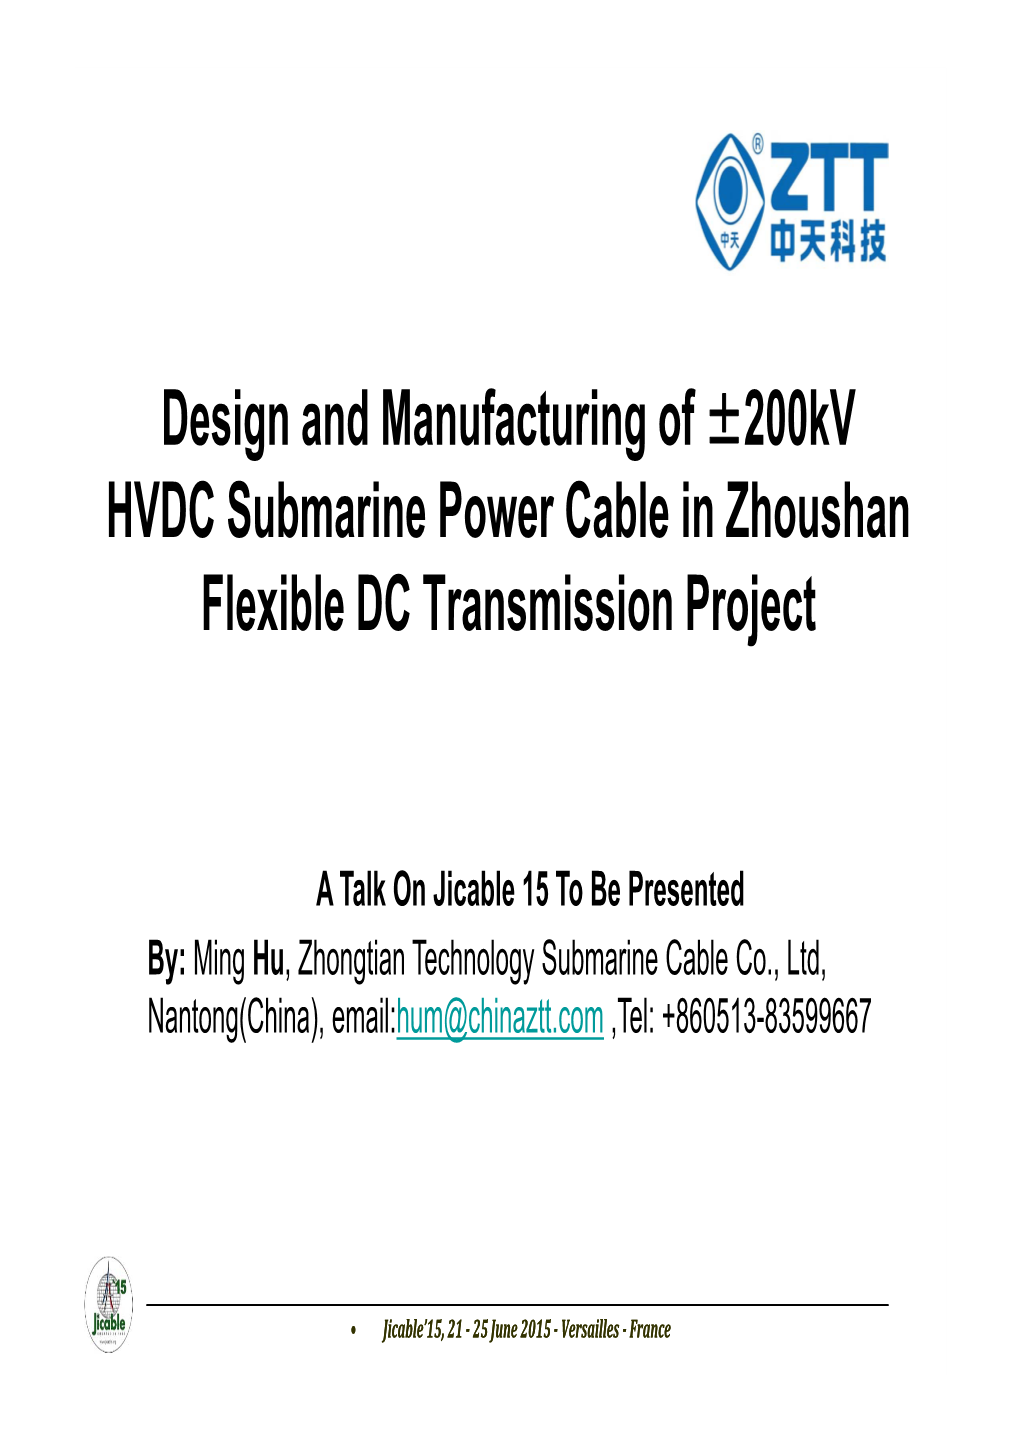 Design and Manufacturing of ±200Kv HVDC Submarine Power Cable in Zhoushan Flexible DC Transmission Project